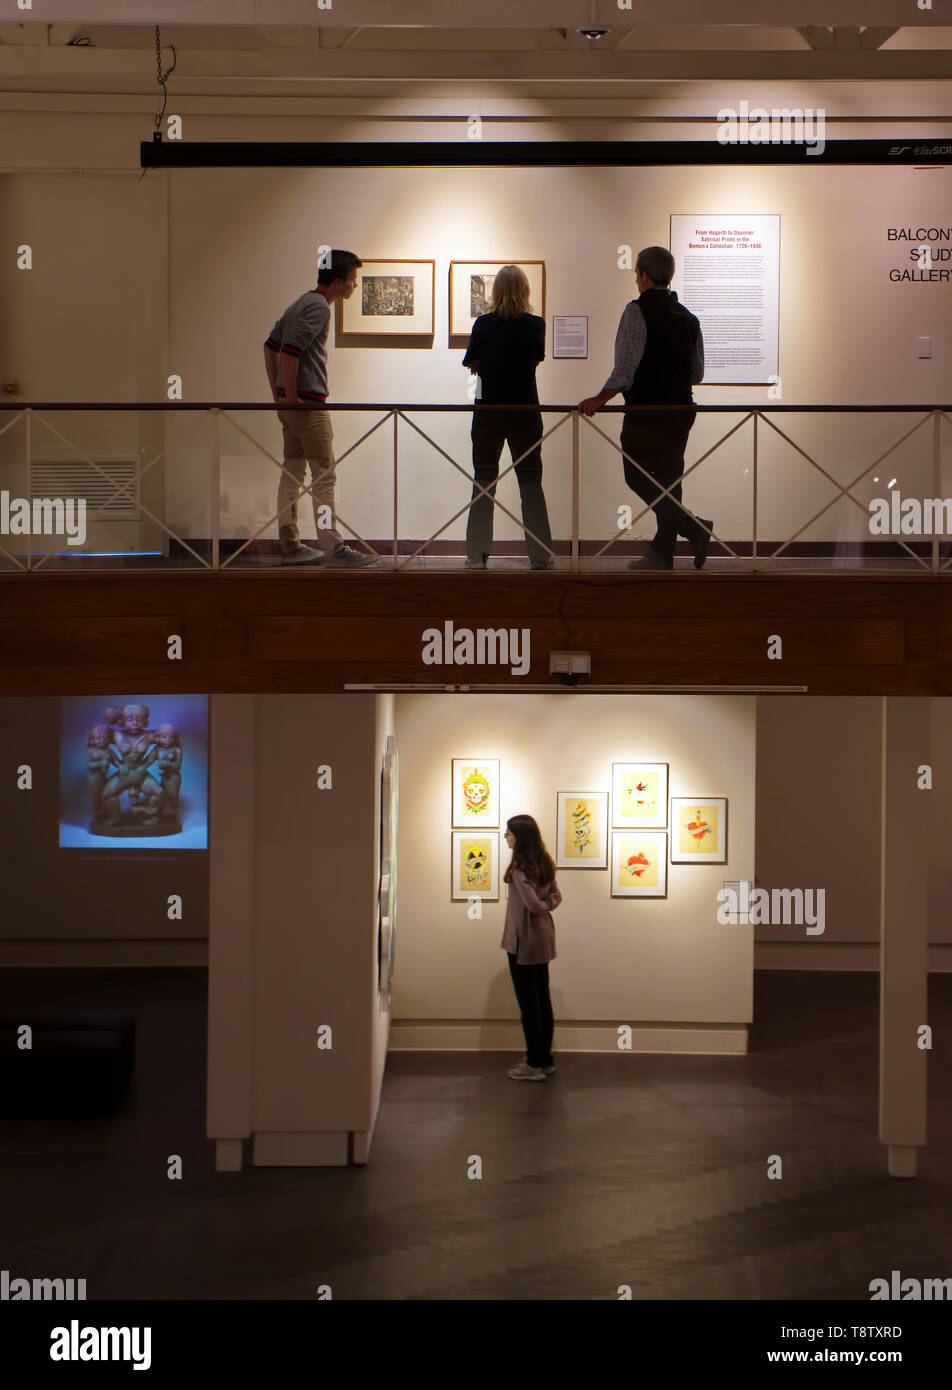 Storrs, CT USA. Oct 2018. Visitors admiring the many works of art at the William Benton Museum of Art on the campus of the University of Connecticut. Stock Photo